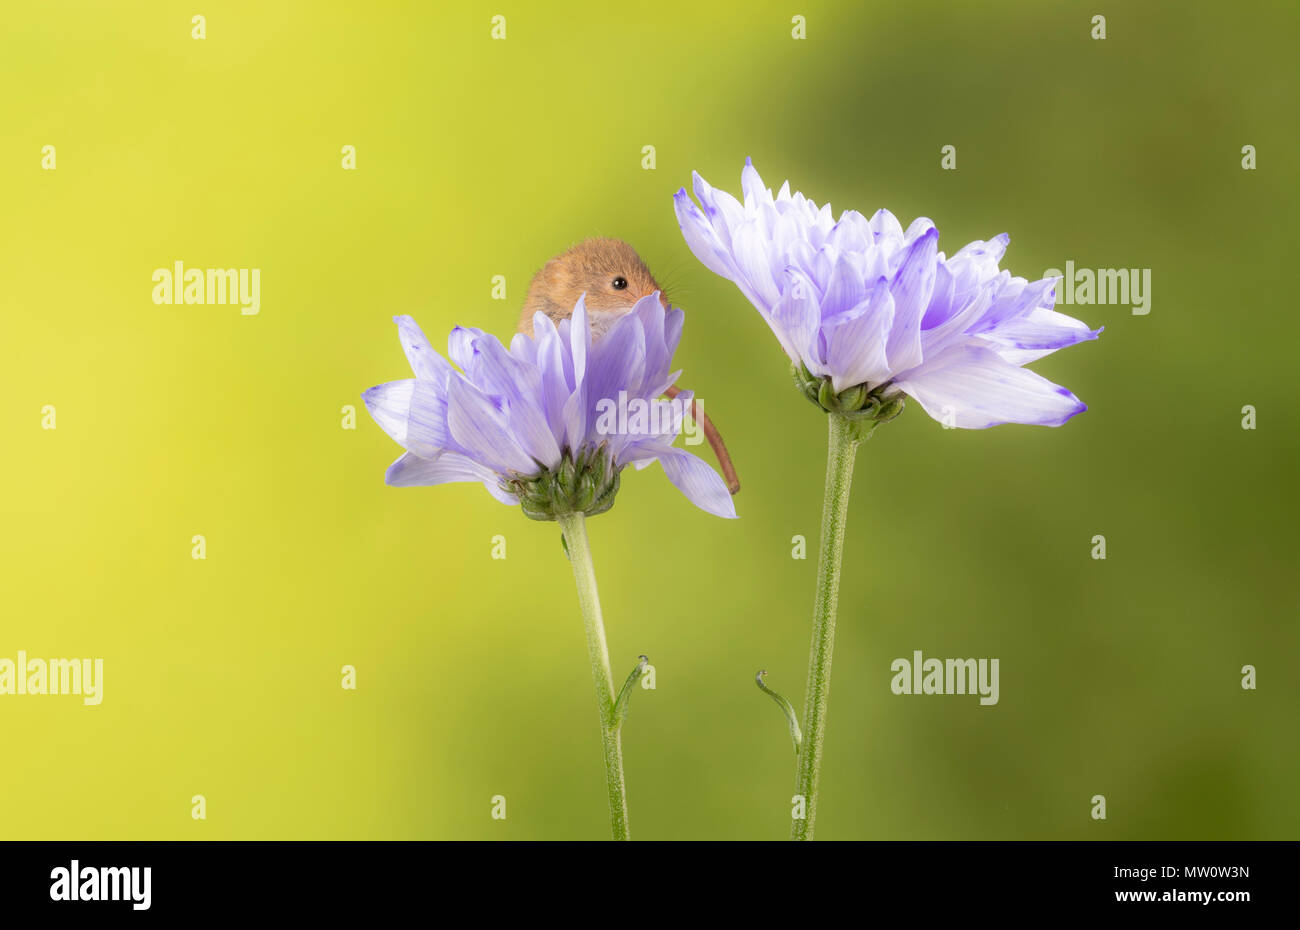 Harvest mice on a lilac chrysanthemum in s tudio setting Stock Photo